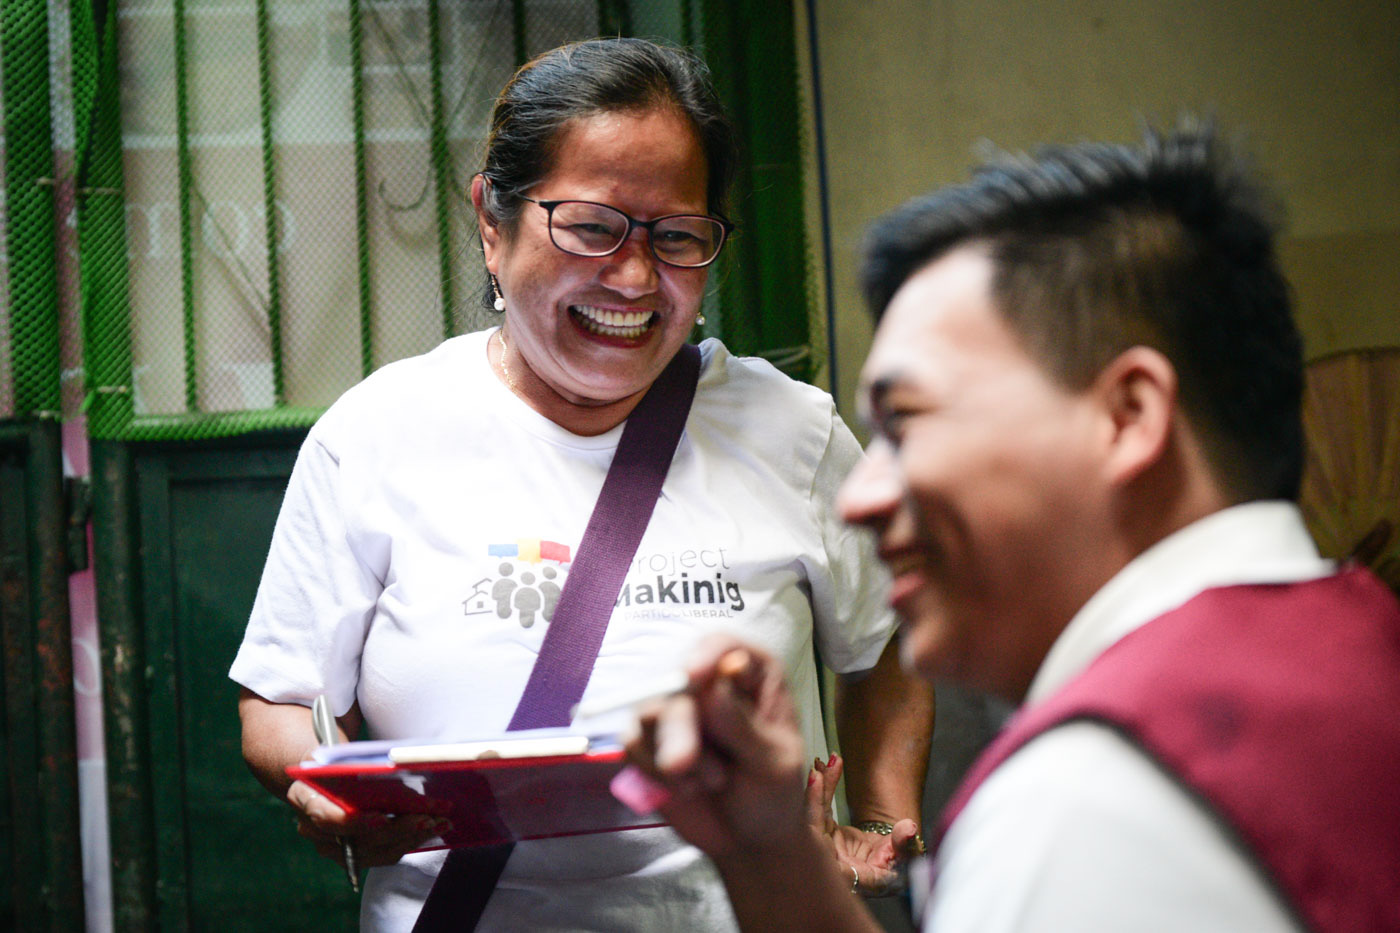 THE INTERVIEW. Project Makinig volunteer Bing Salas shares a light moment with one of her interviewees. Photo by Alecs Ongcal/Rappler  